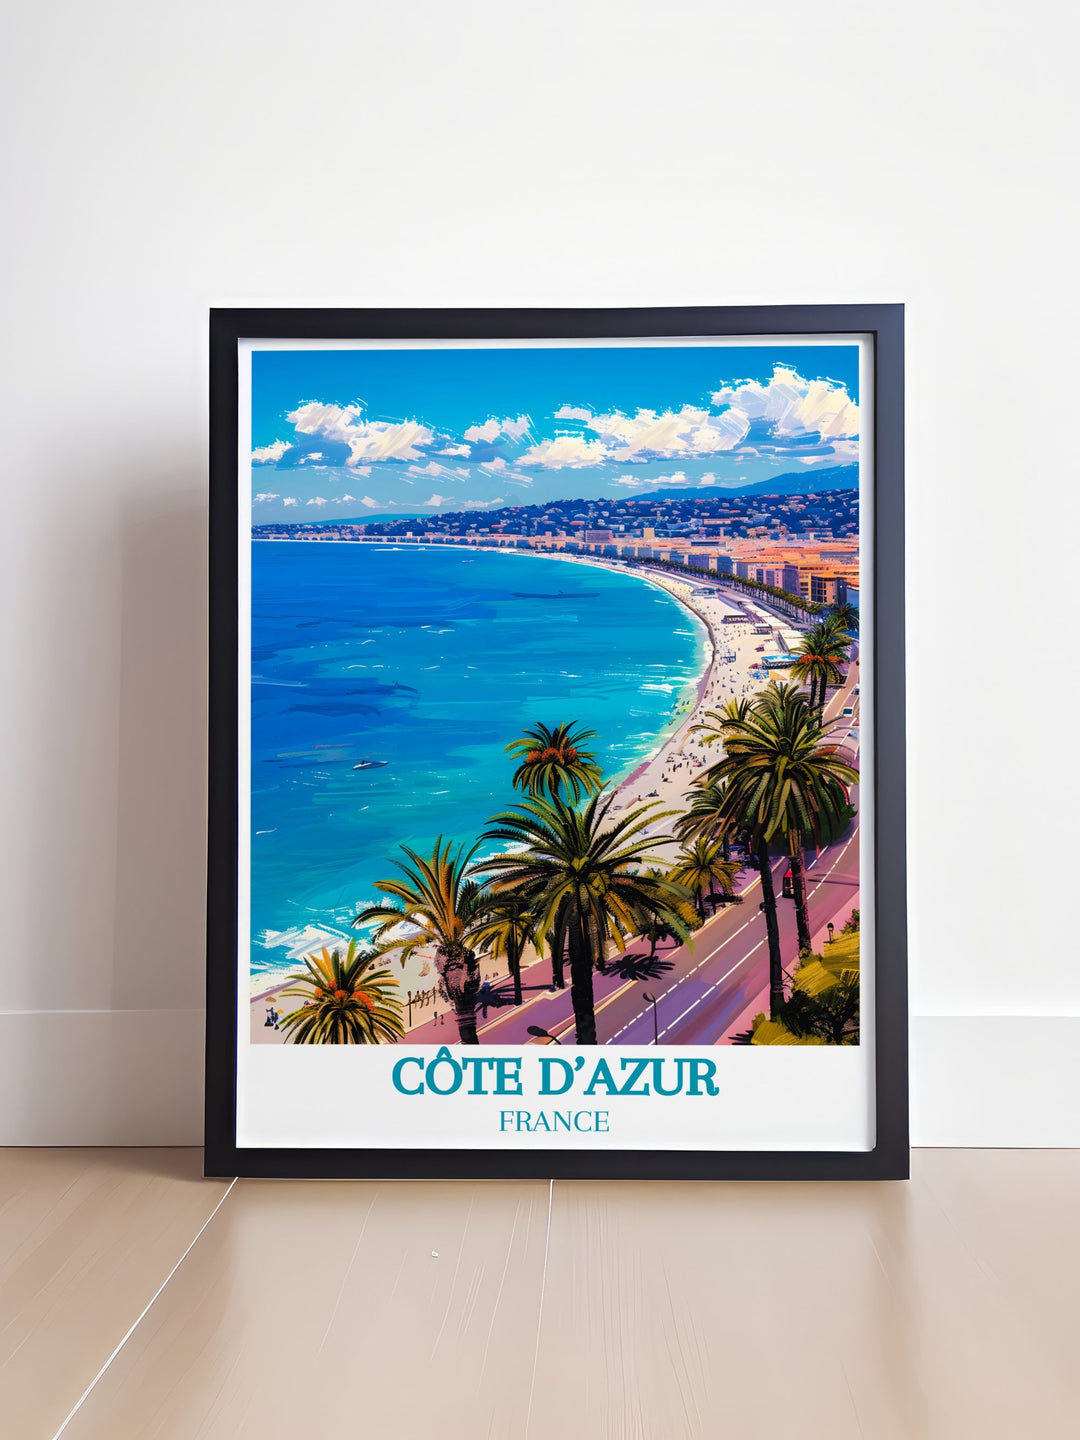 Framed art print of Promenade des Anglais, Nice, Côte dAzur, France, capturing the elegance of the region. The artwork showcases the stunning Mediterranean views, grand hotels, and lively street scenes, making it a striking addition to any art collection.